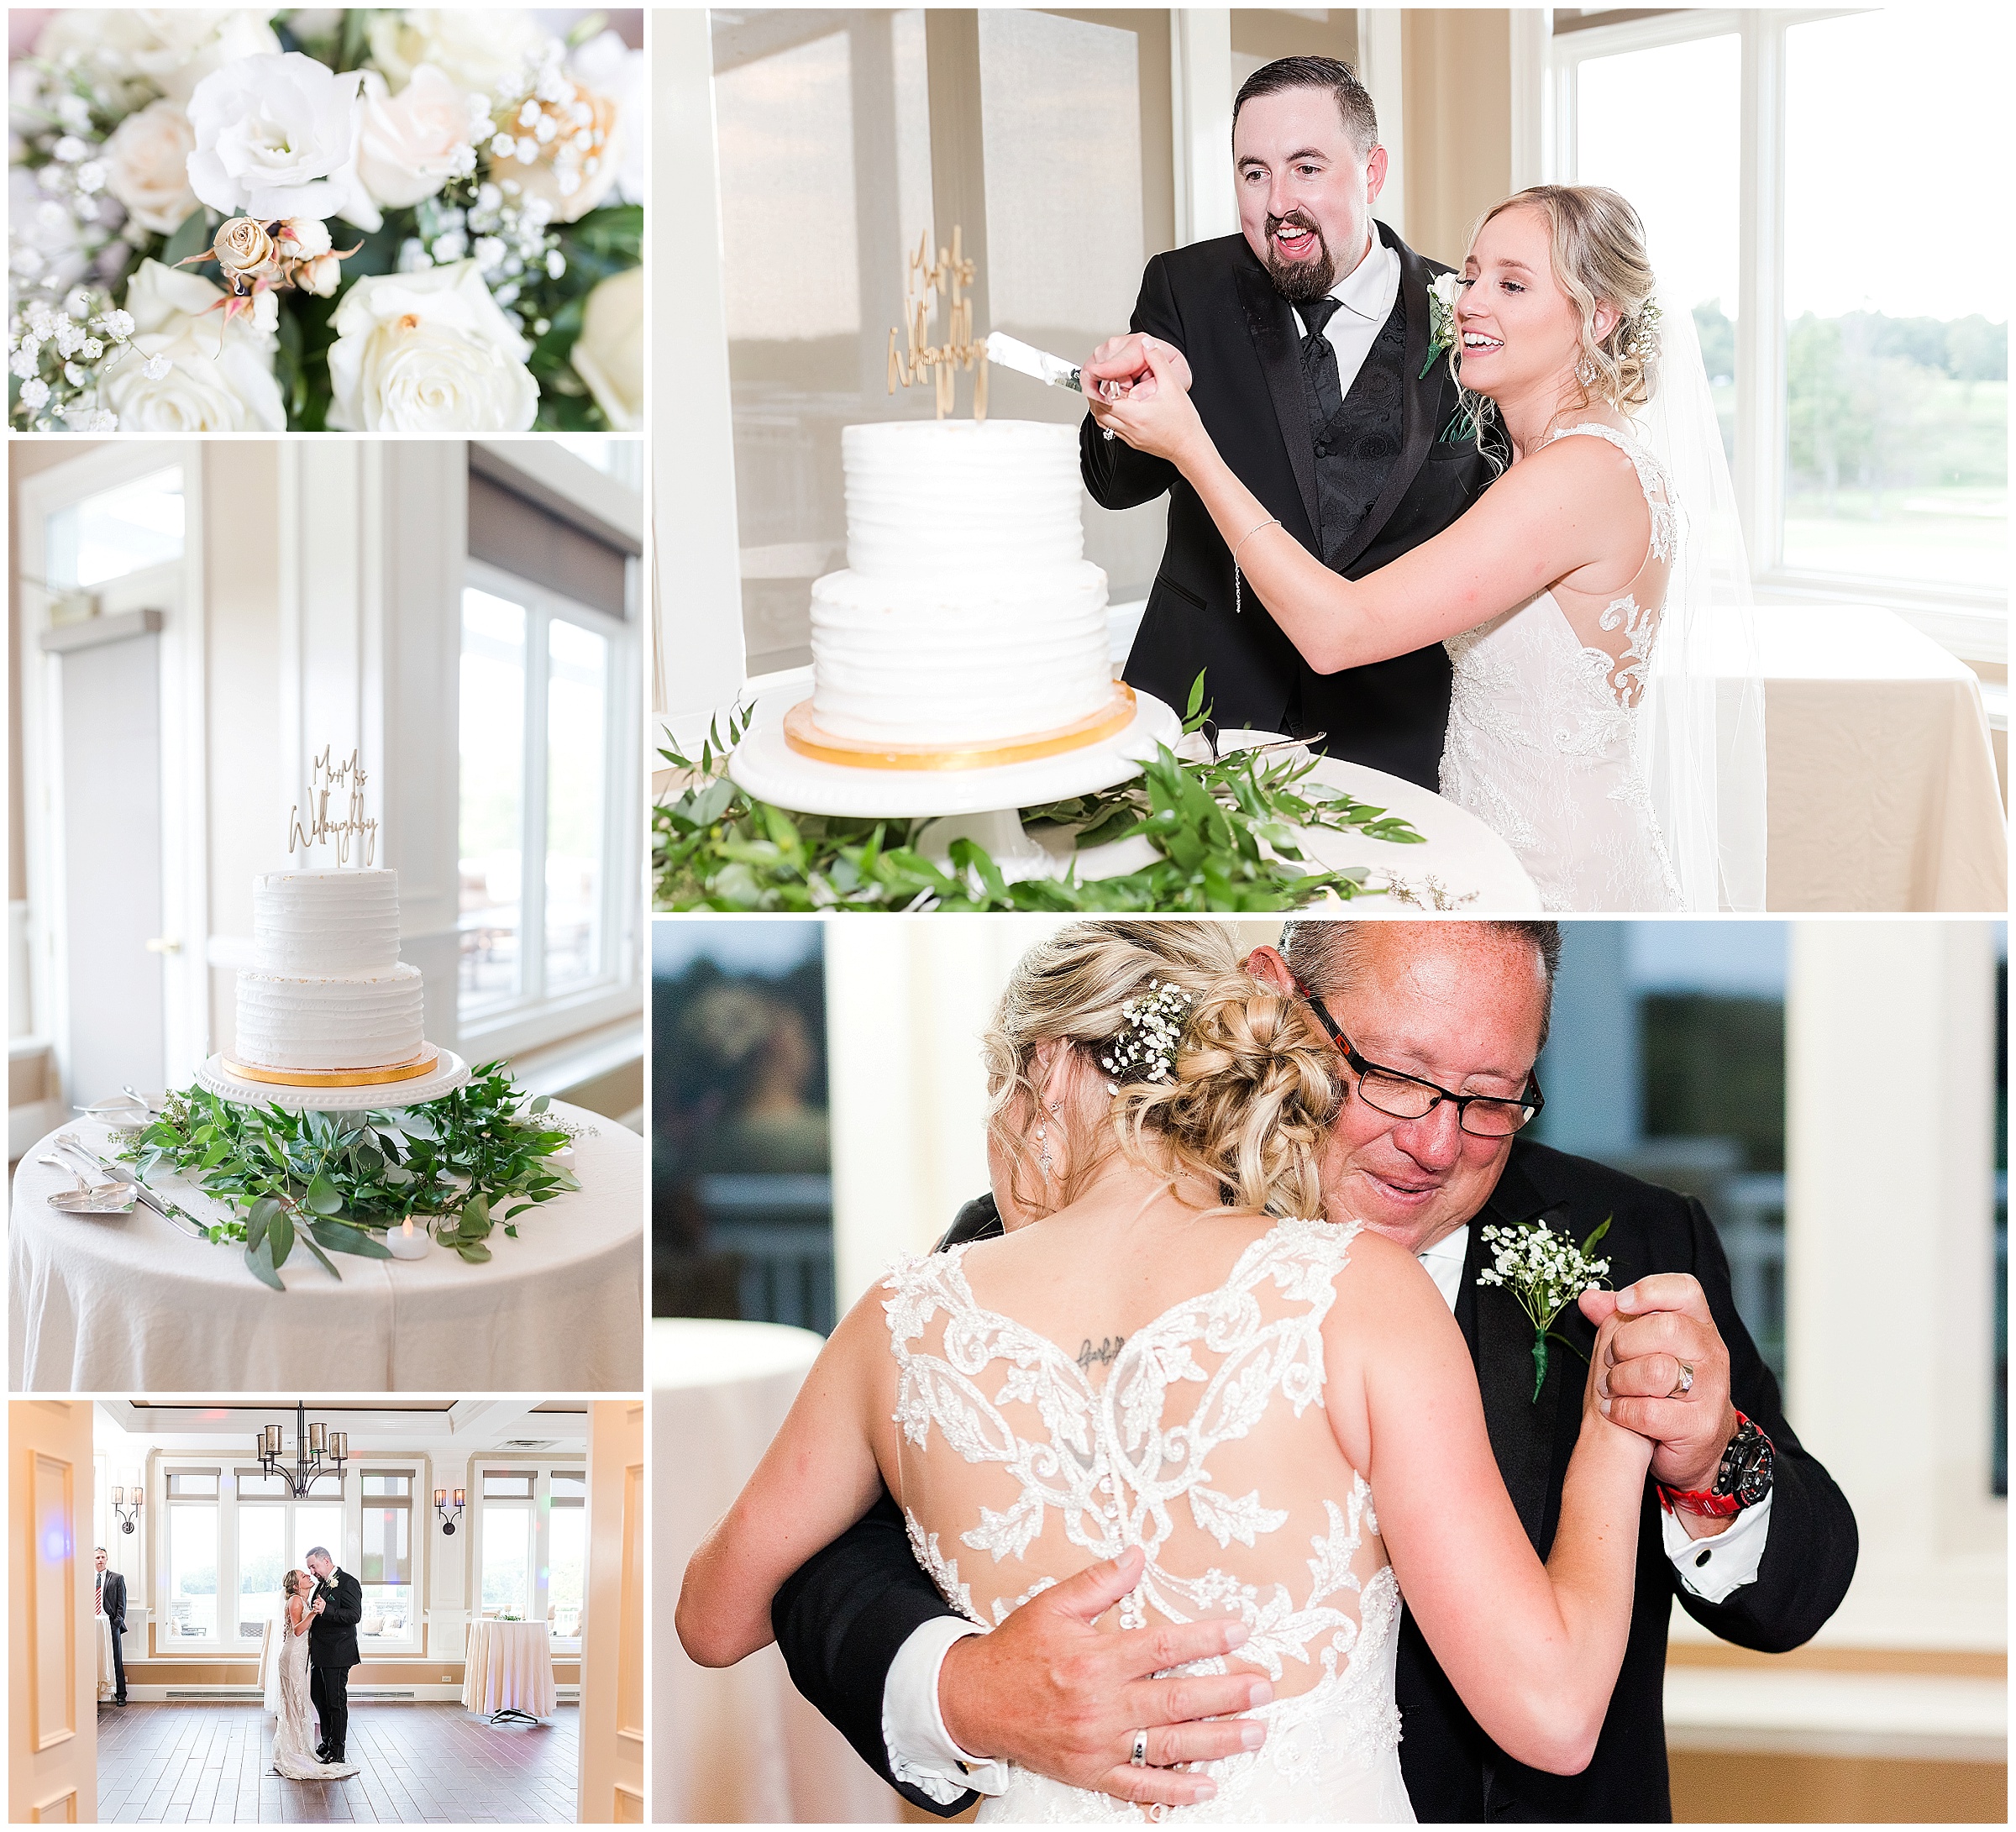 wedding cake cutting, bouquet, first dance, and father daughter dance